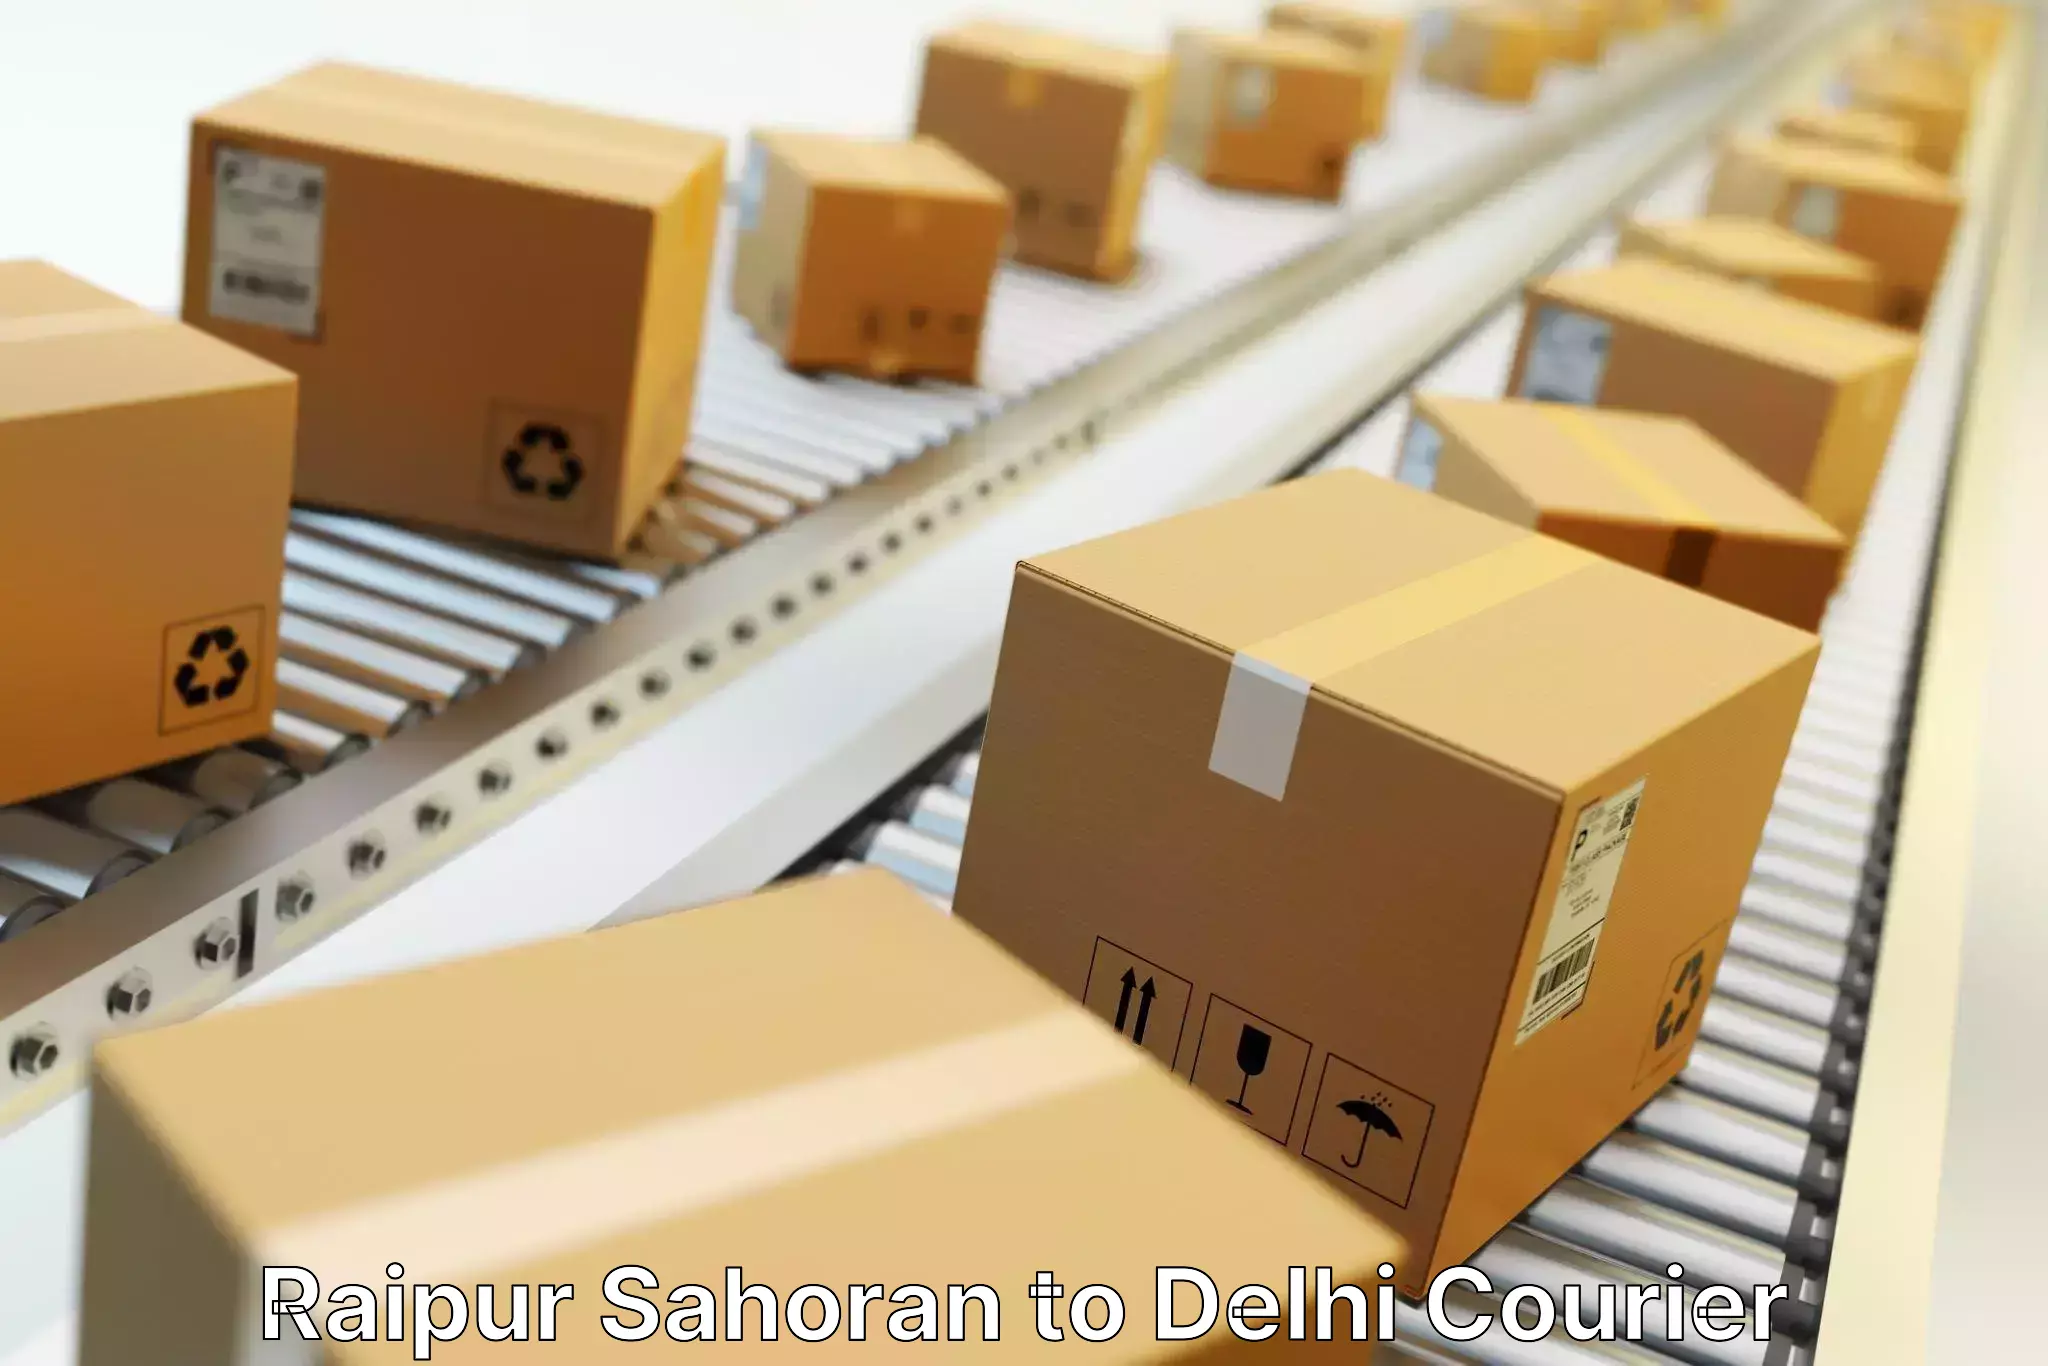 Large-scale shipping solutions Raipur Sahoran to University of Delhi